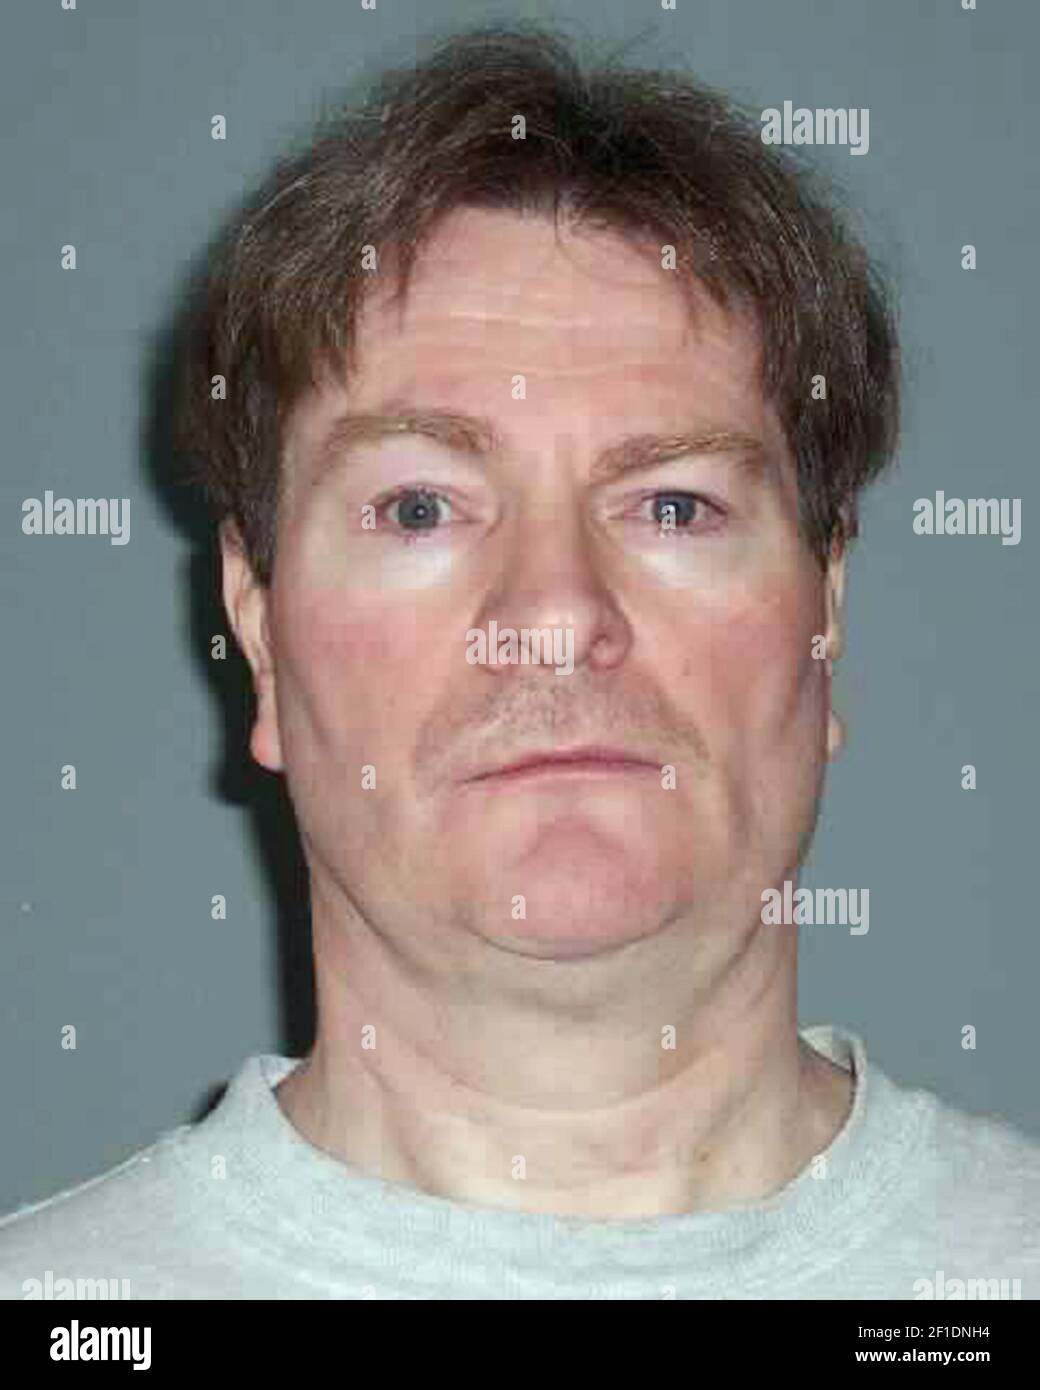 A photo provided by the state Department of Corrections shows Kevin Coe in December 2005 at the Washington State Penitentiary in Walla Walla, Wash. Washington state has taken the first steps to keep Coe, convicted in the notorious 'South Hill Rapist' case, in custody even as he completes his prison sentence. (Photo by Department of Corrections via The Spokesman-Review) *** Please Use Credit from Credit Field *** Stock Photo